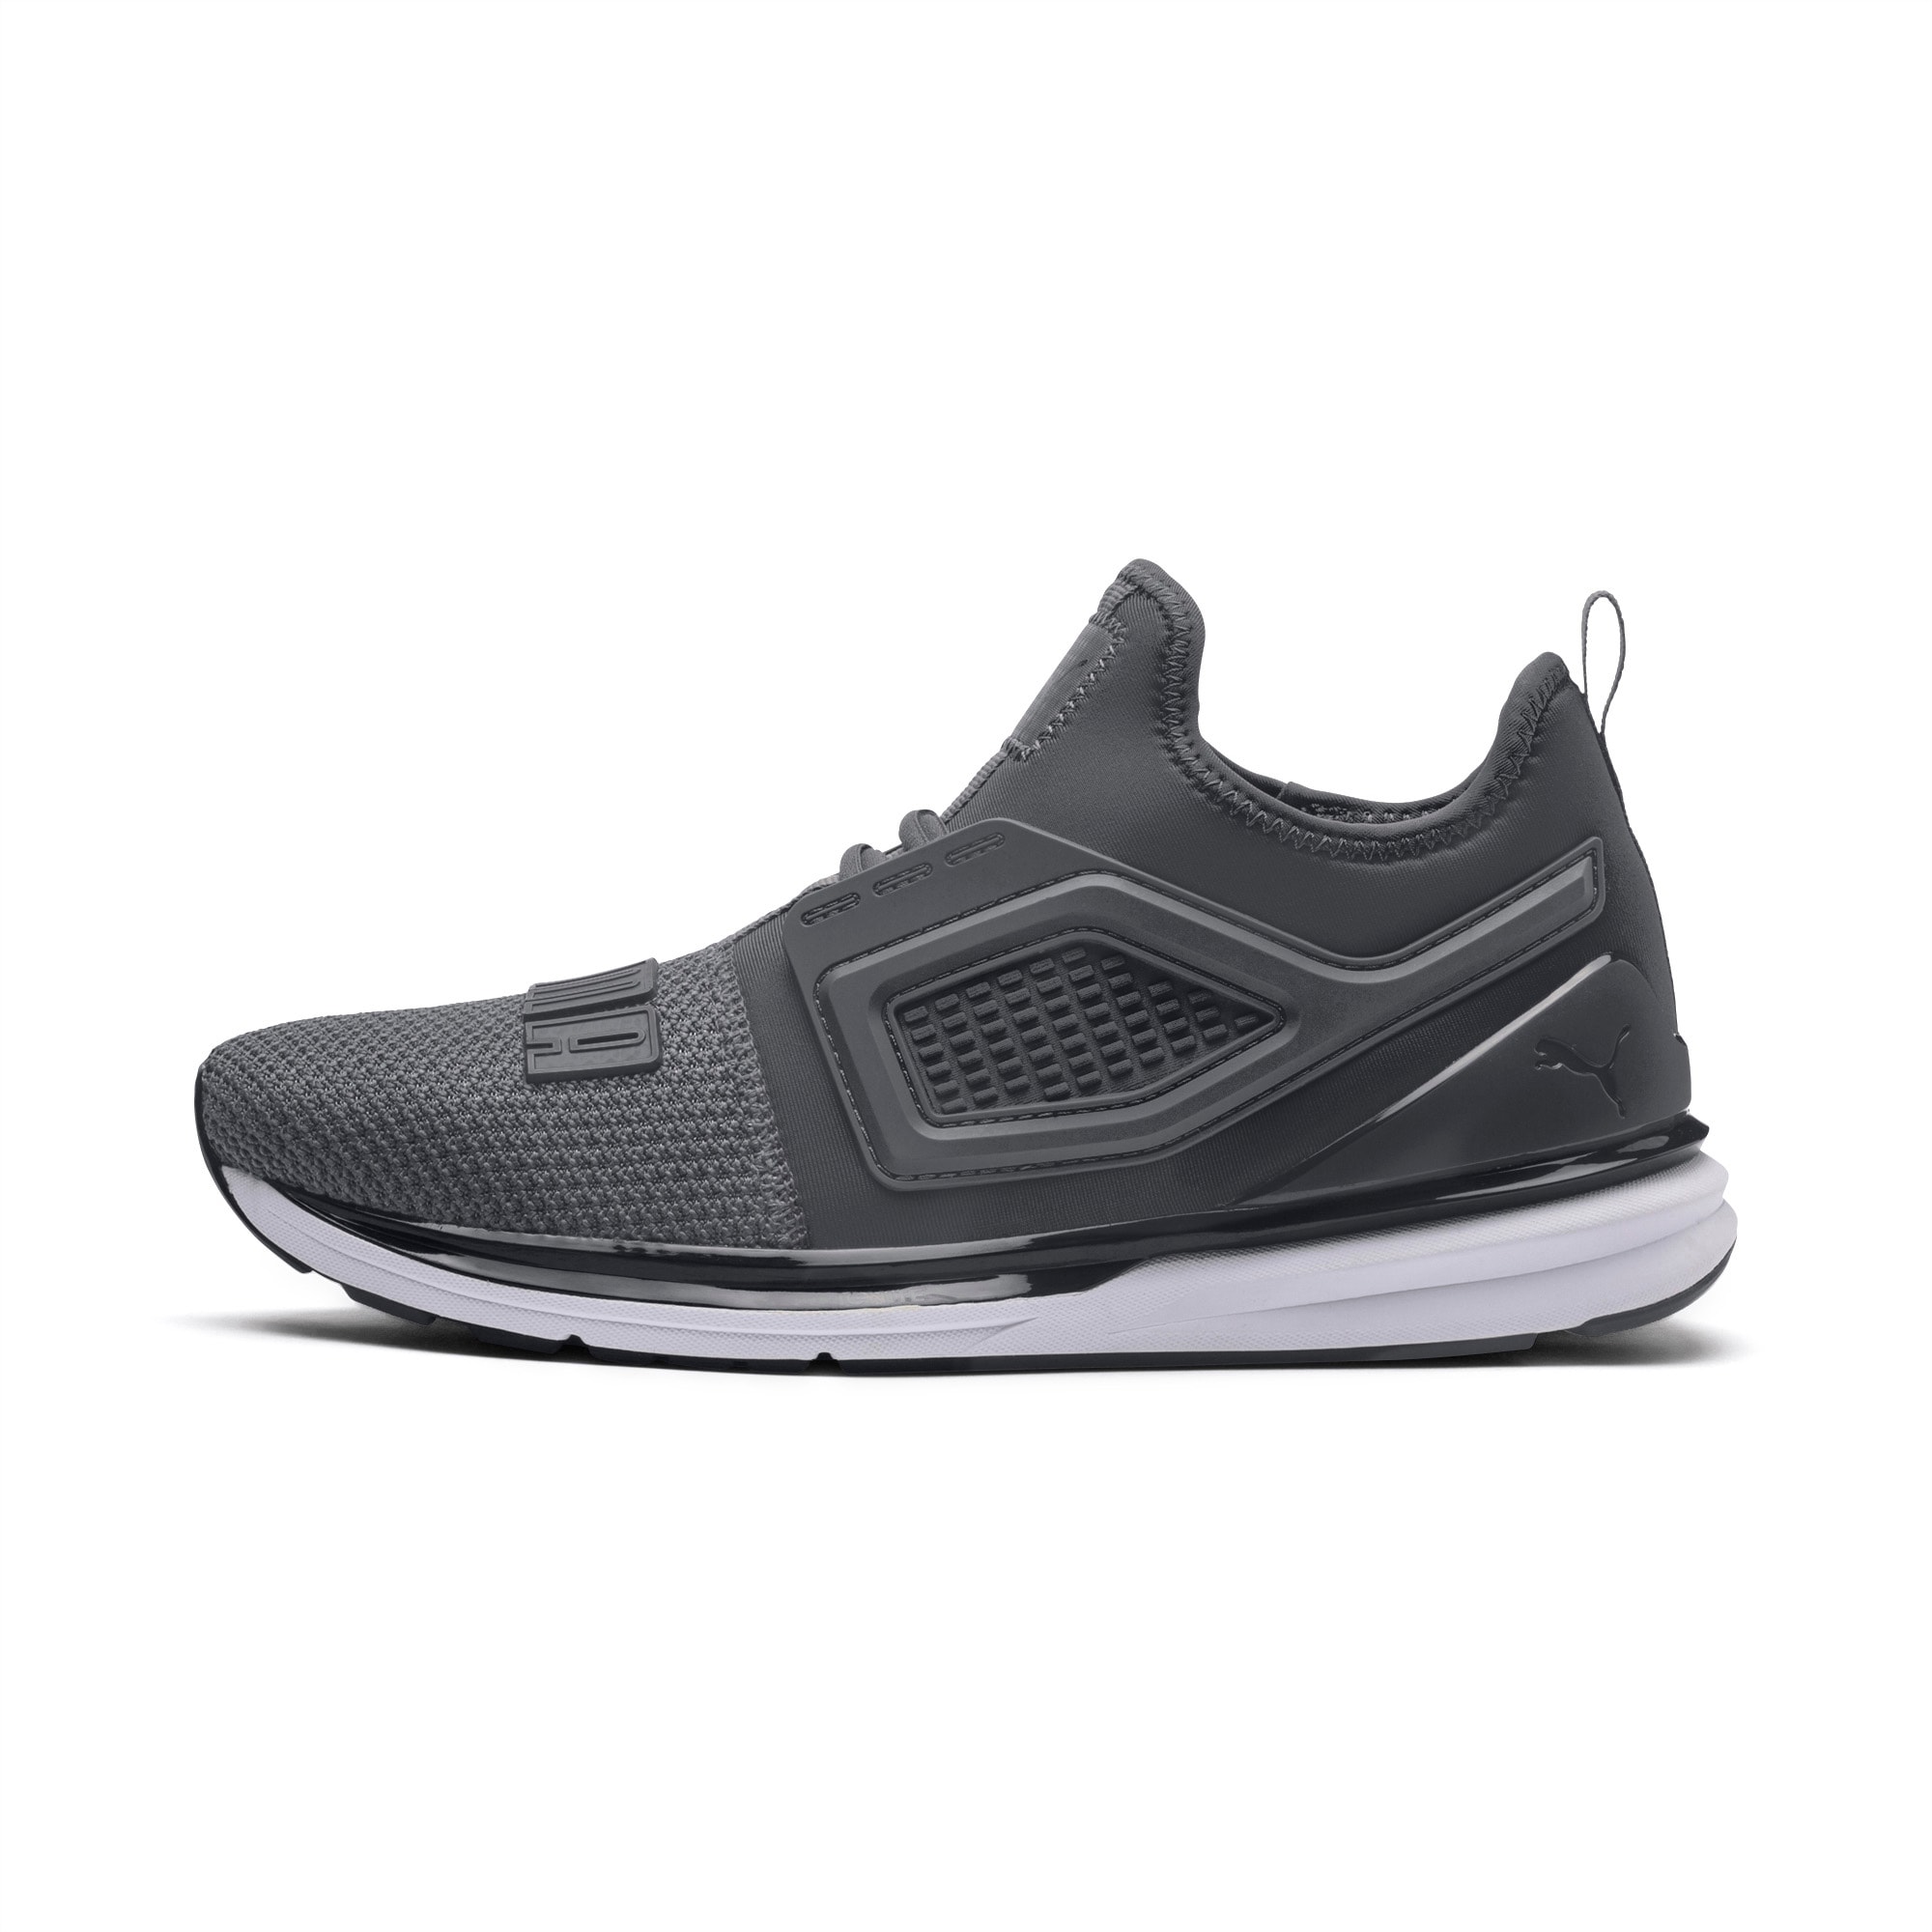 IGNITE Limitless 2 Men's Running Shoes 